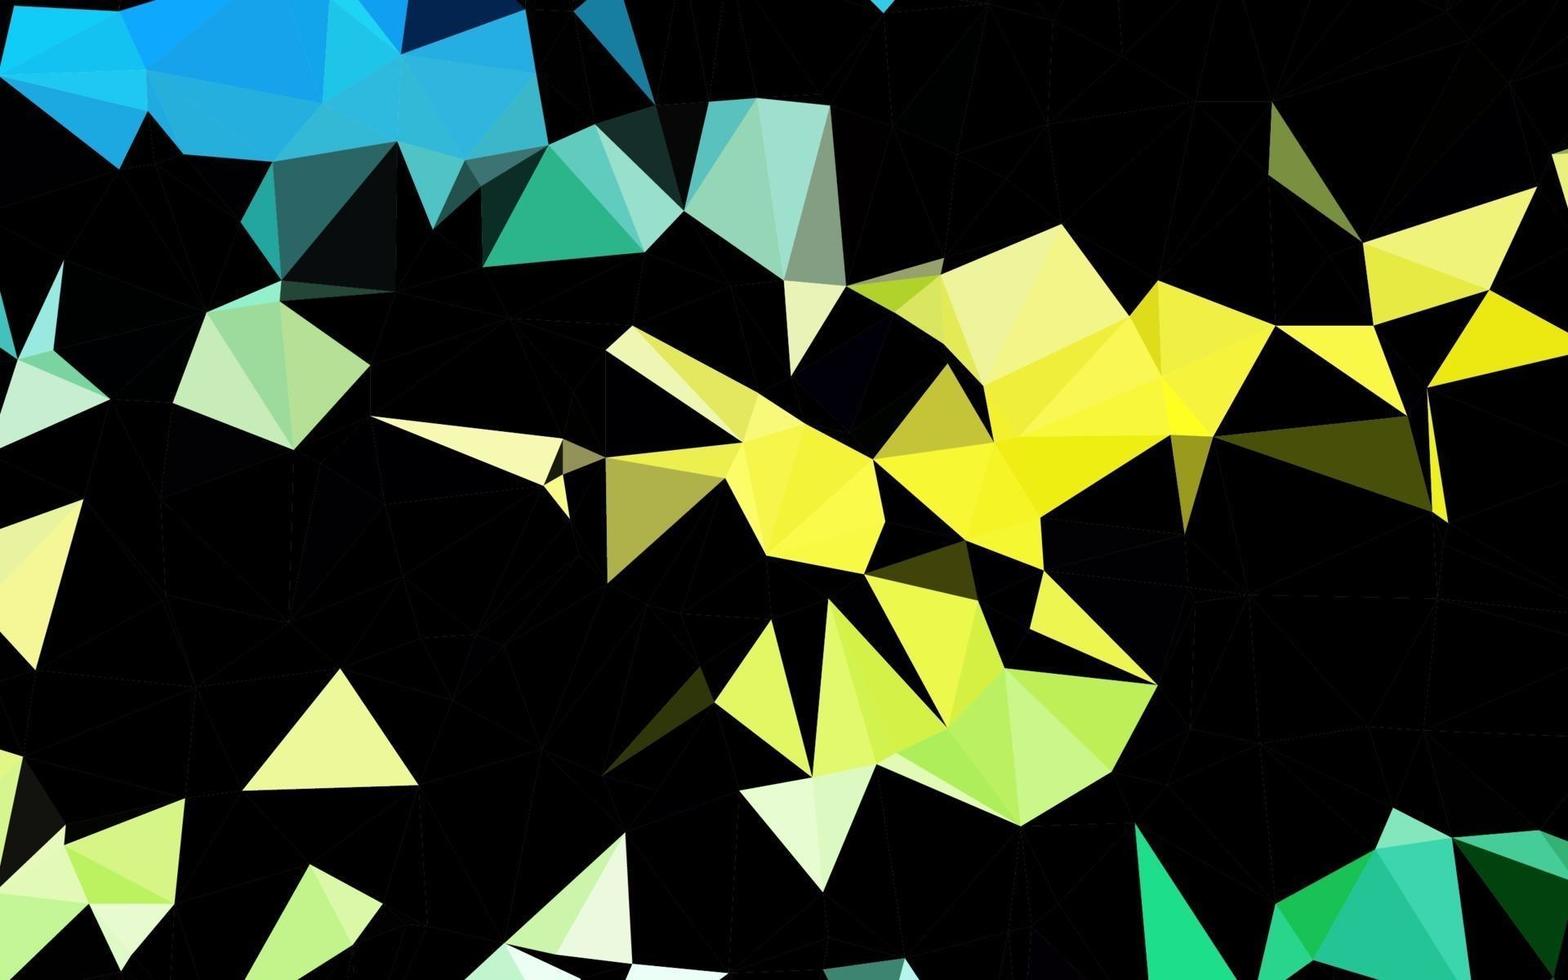 Light Blue, Yellow vector blurry triangle texture.